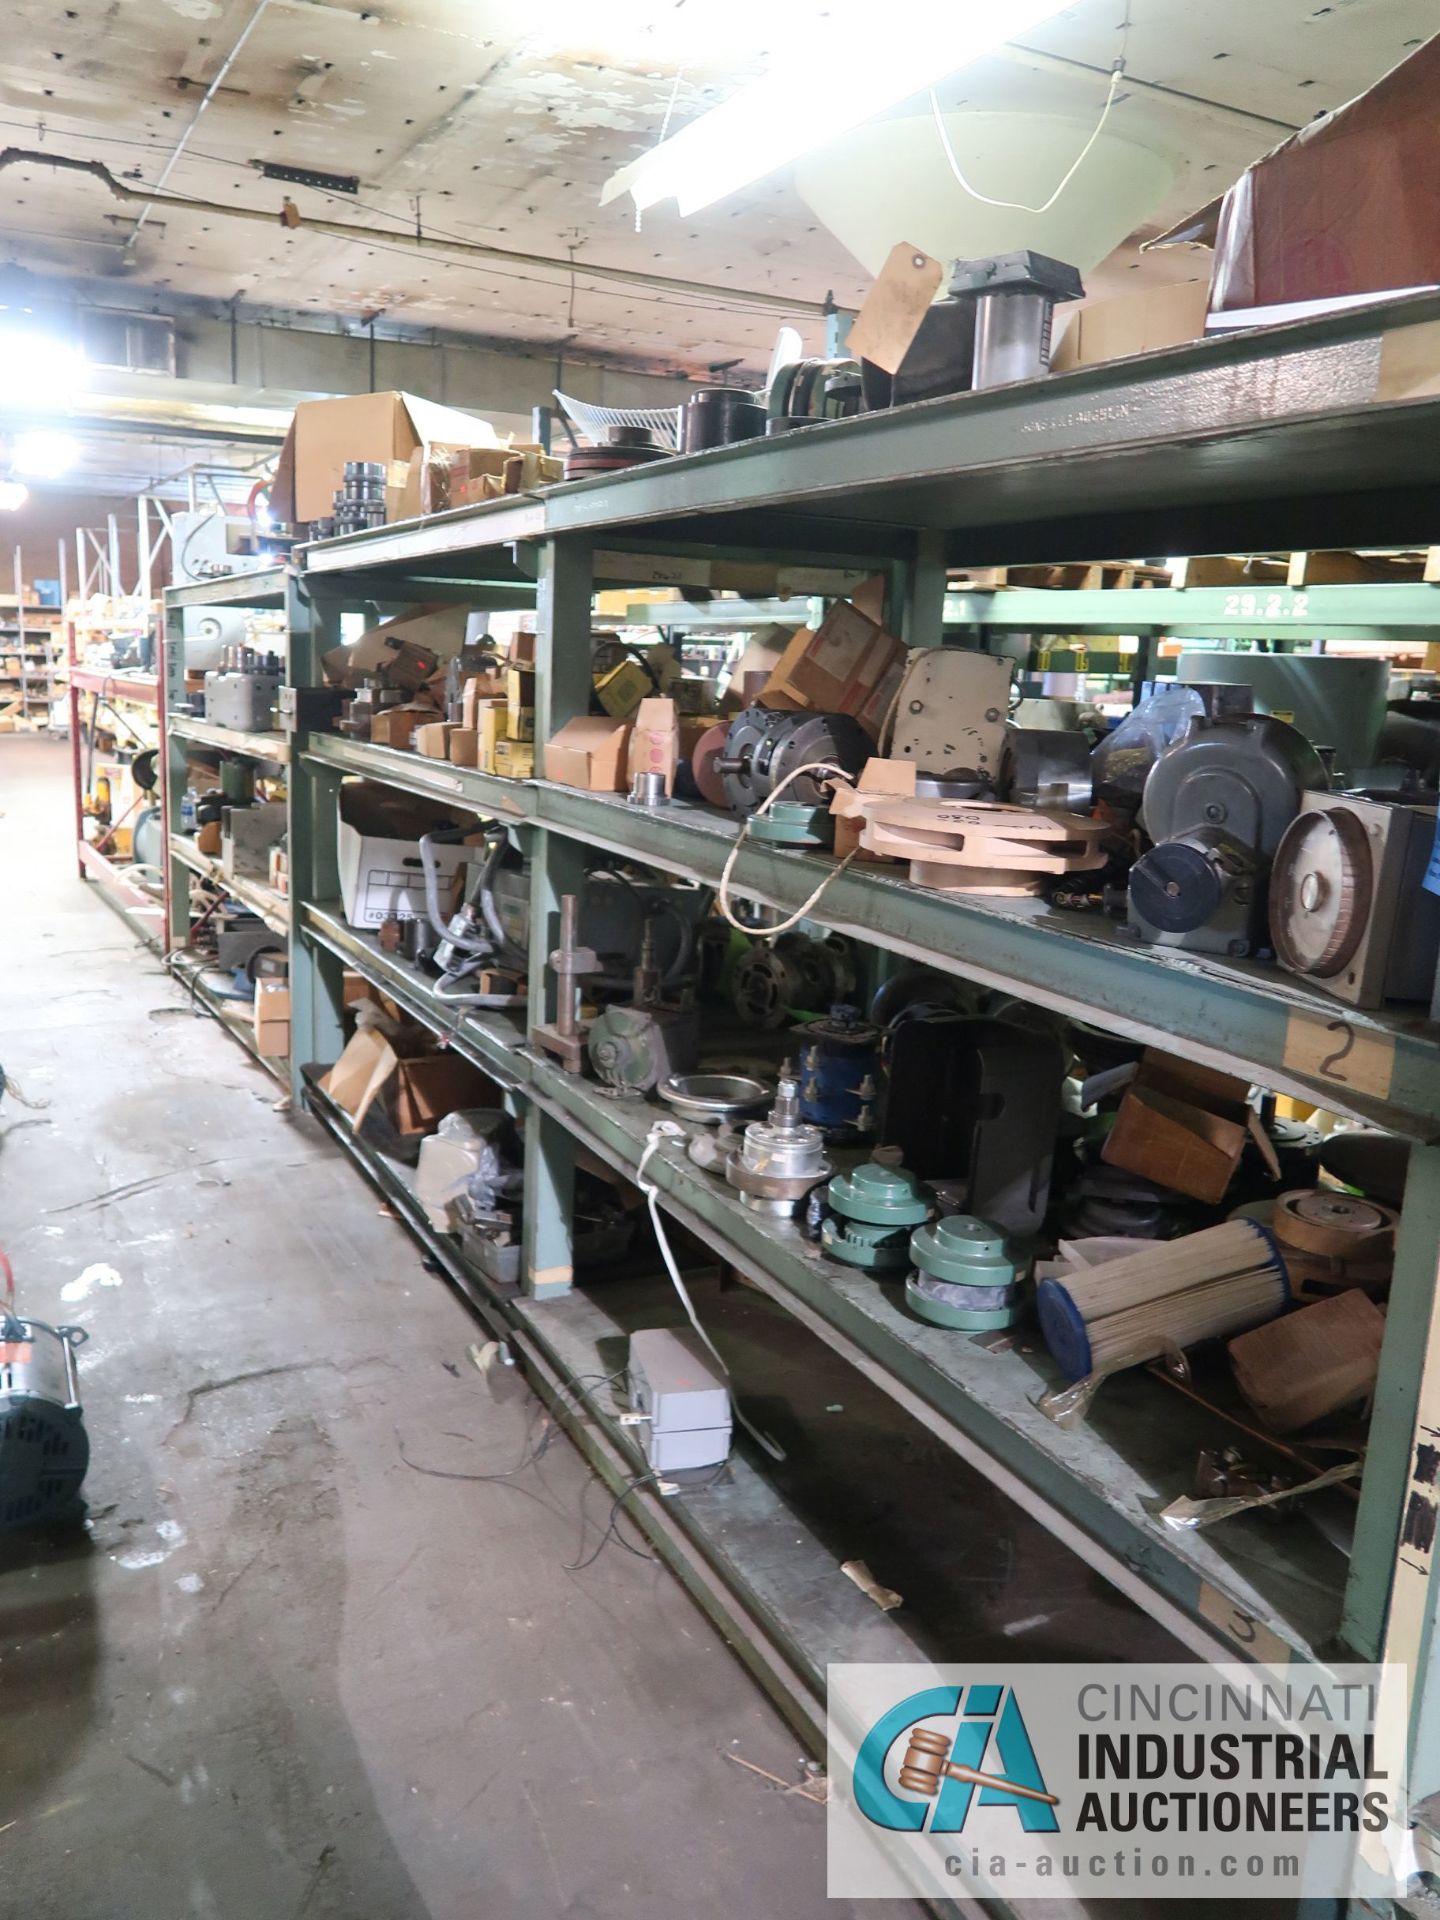 (LOT) MACHINE PARTS, COMPRESSORS, REDUCERS, GEARS, MOTORS, AND OTHER (4) SECTIONS RACK